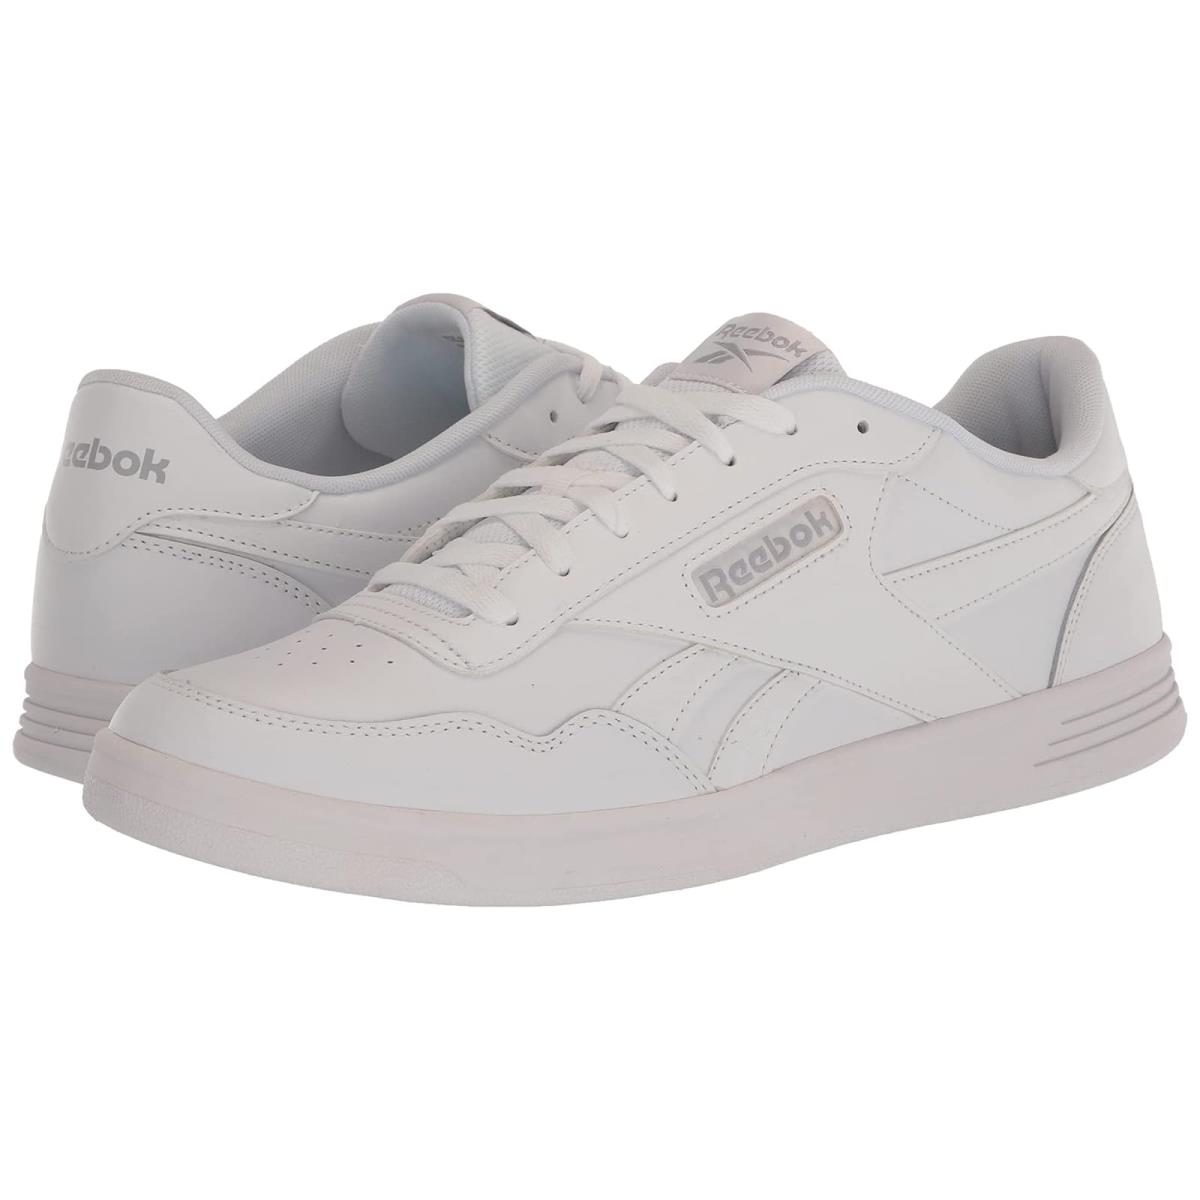 Unisex Sneakers Athletic Shoes Reebok Court Advance White/Cold Grey